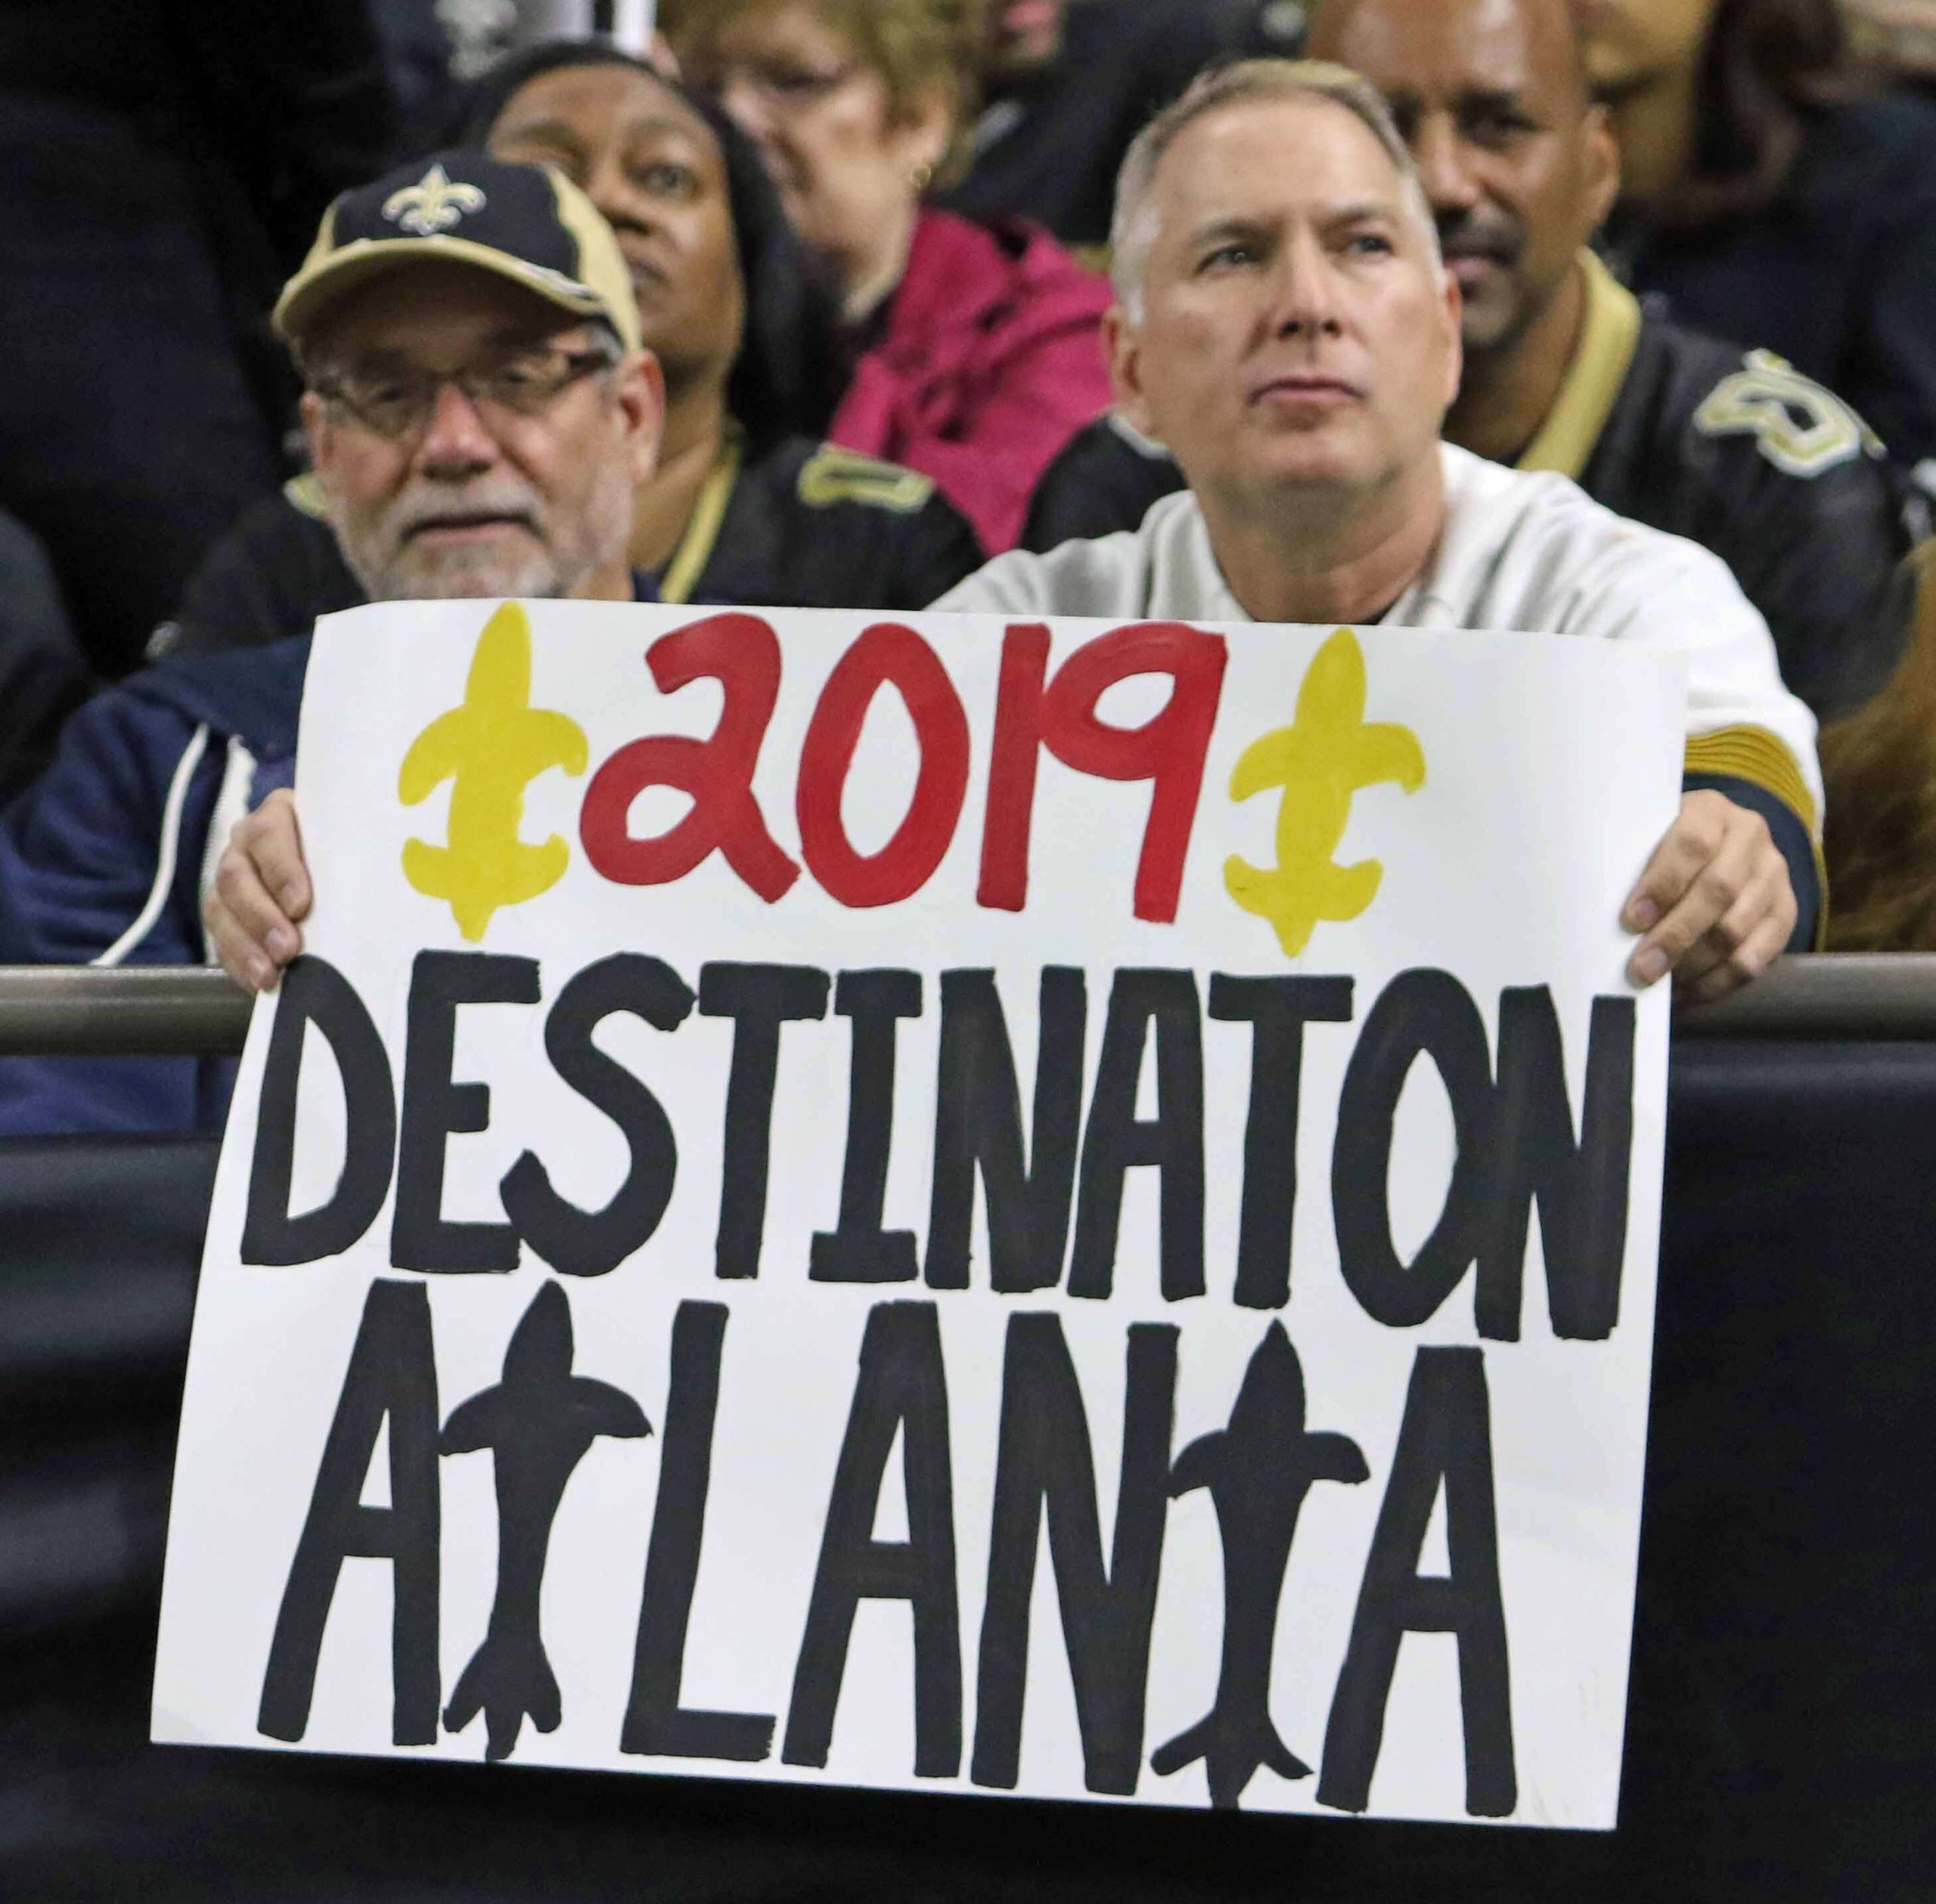 New Orleans Saints superfan Larry Rolling holds up a 2019 Destination - Atlanta sign during the New Orleans Saints vs. Carolina Panthers game at the Mercedes-Benz Superdome in New Orleans on Sunday, December 30, 2018.  (Photo by Peter G. Forest)